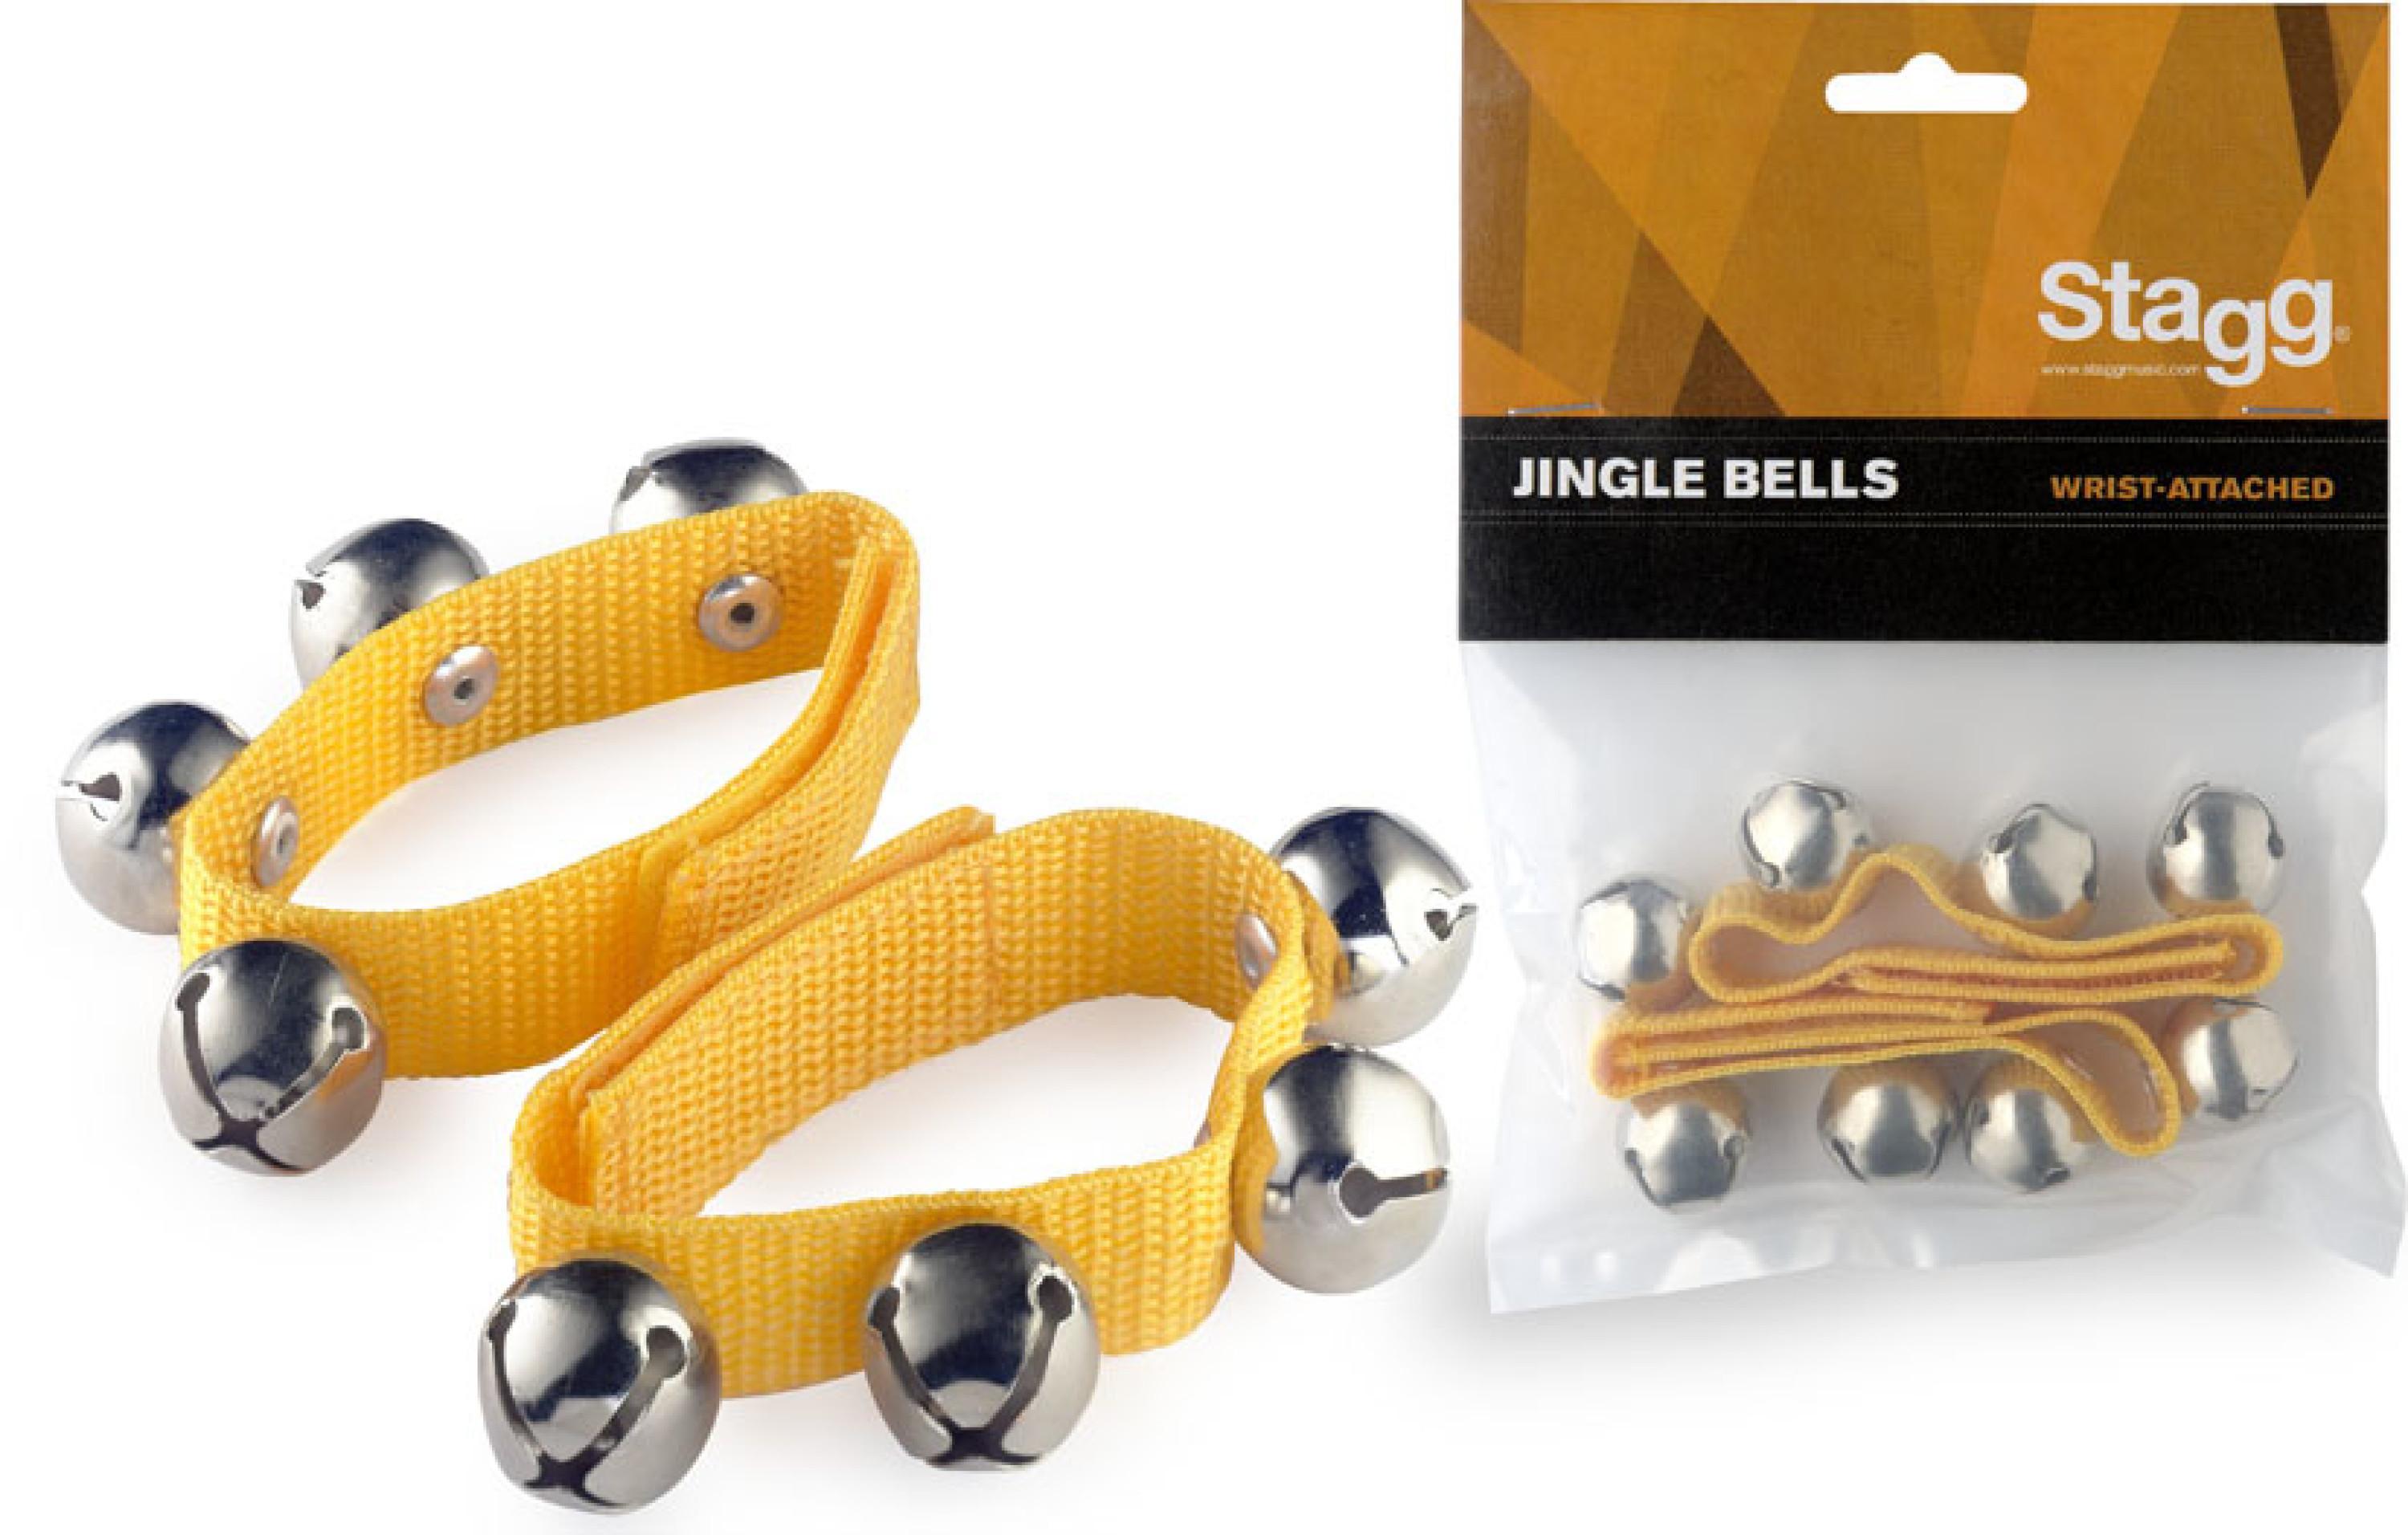 Shake percussions Stagg SWRB4 Jingle Bells - Yellow